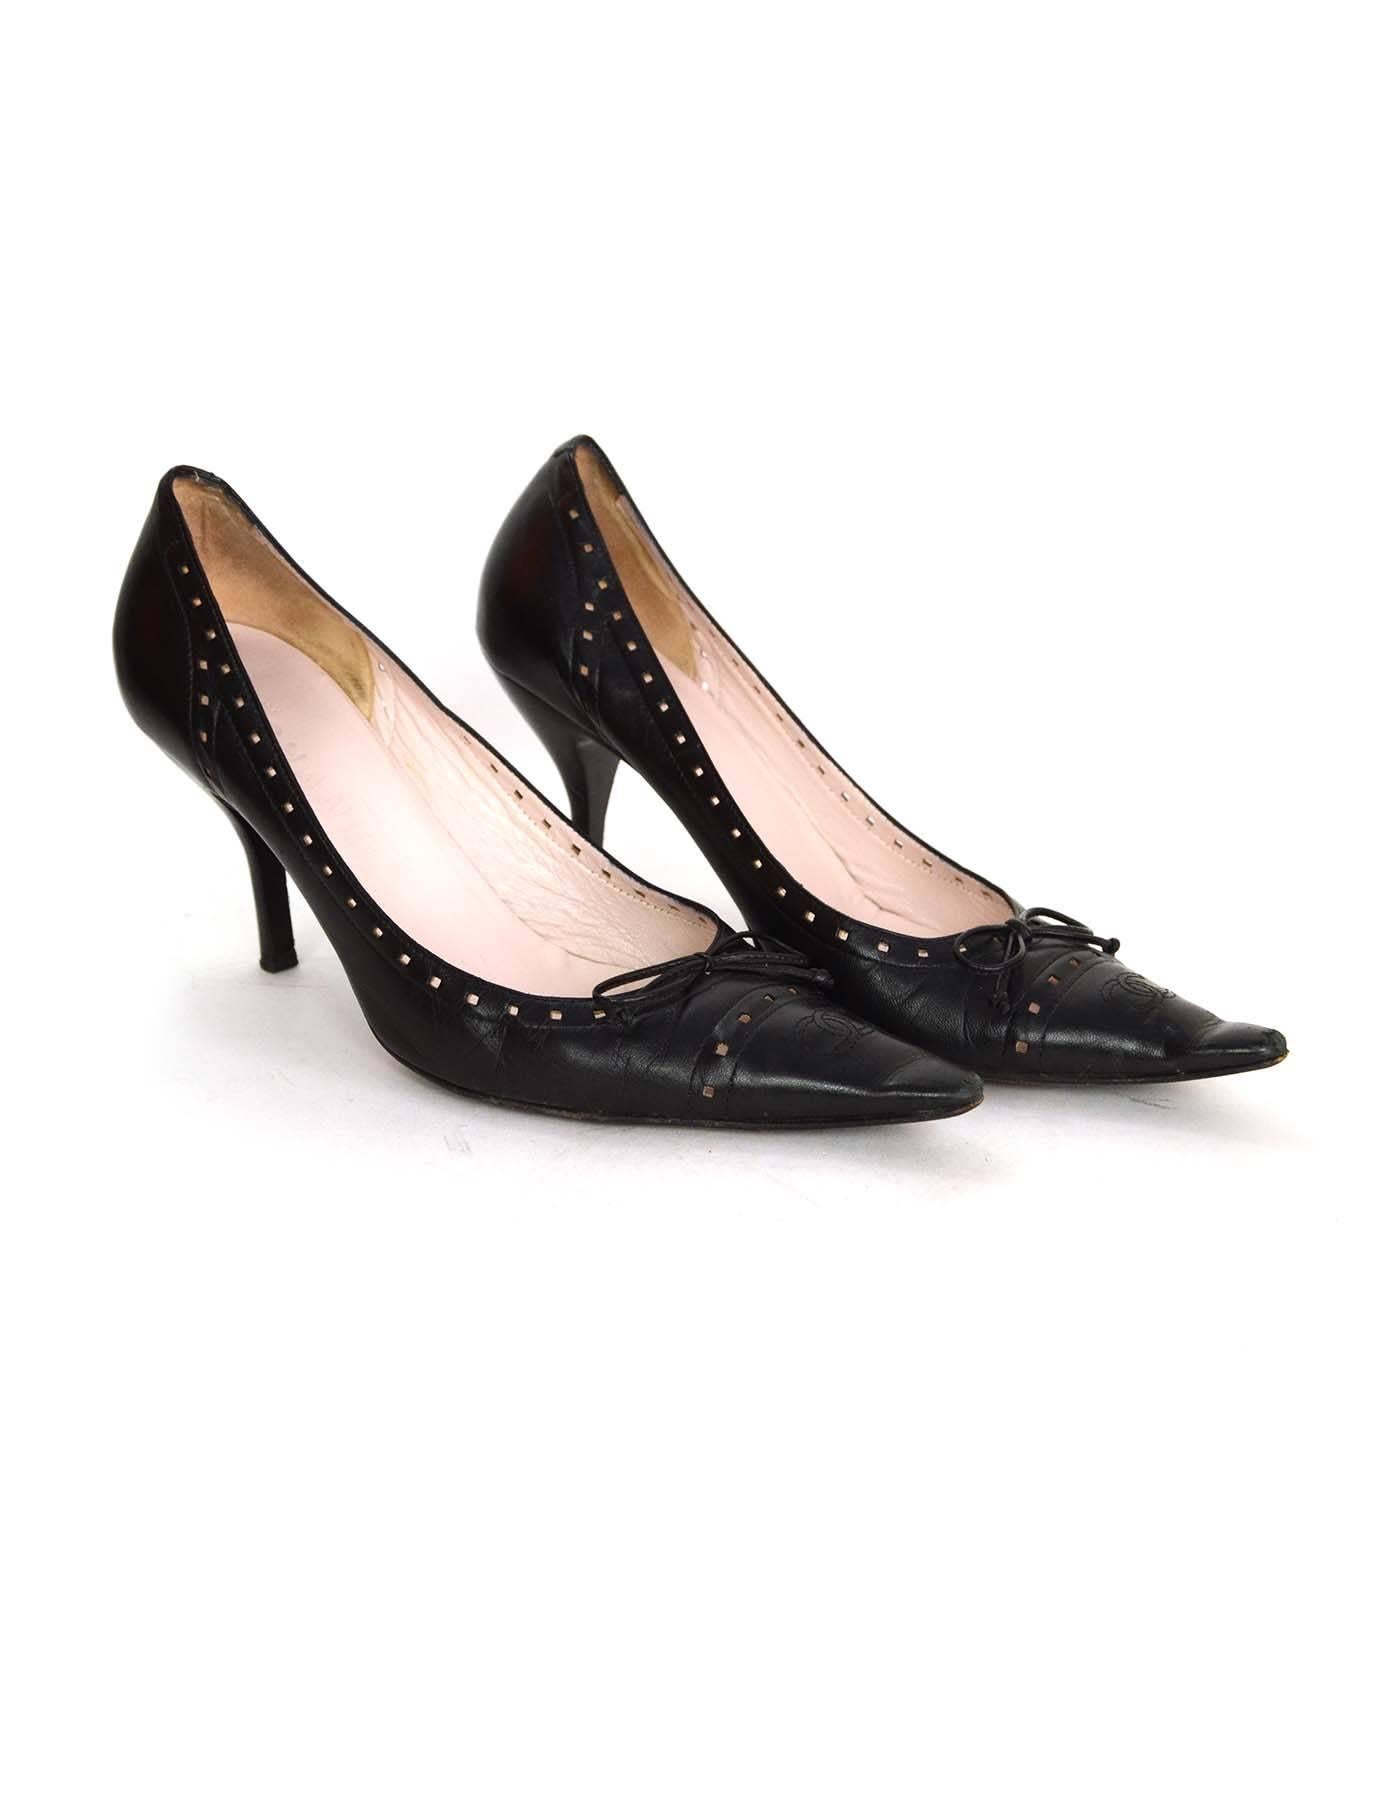 Women's Chanel Perforated Black Pointed Toe Pumps Sz 38.5